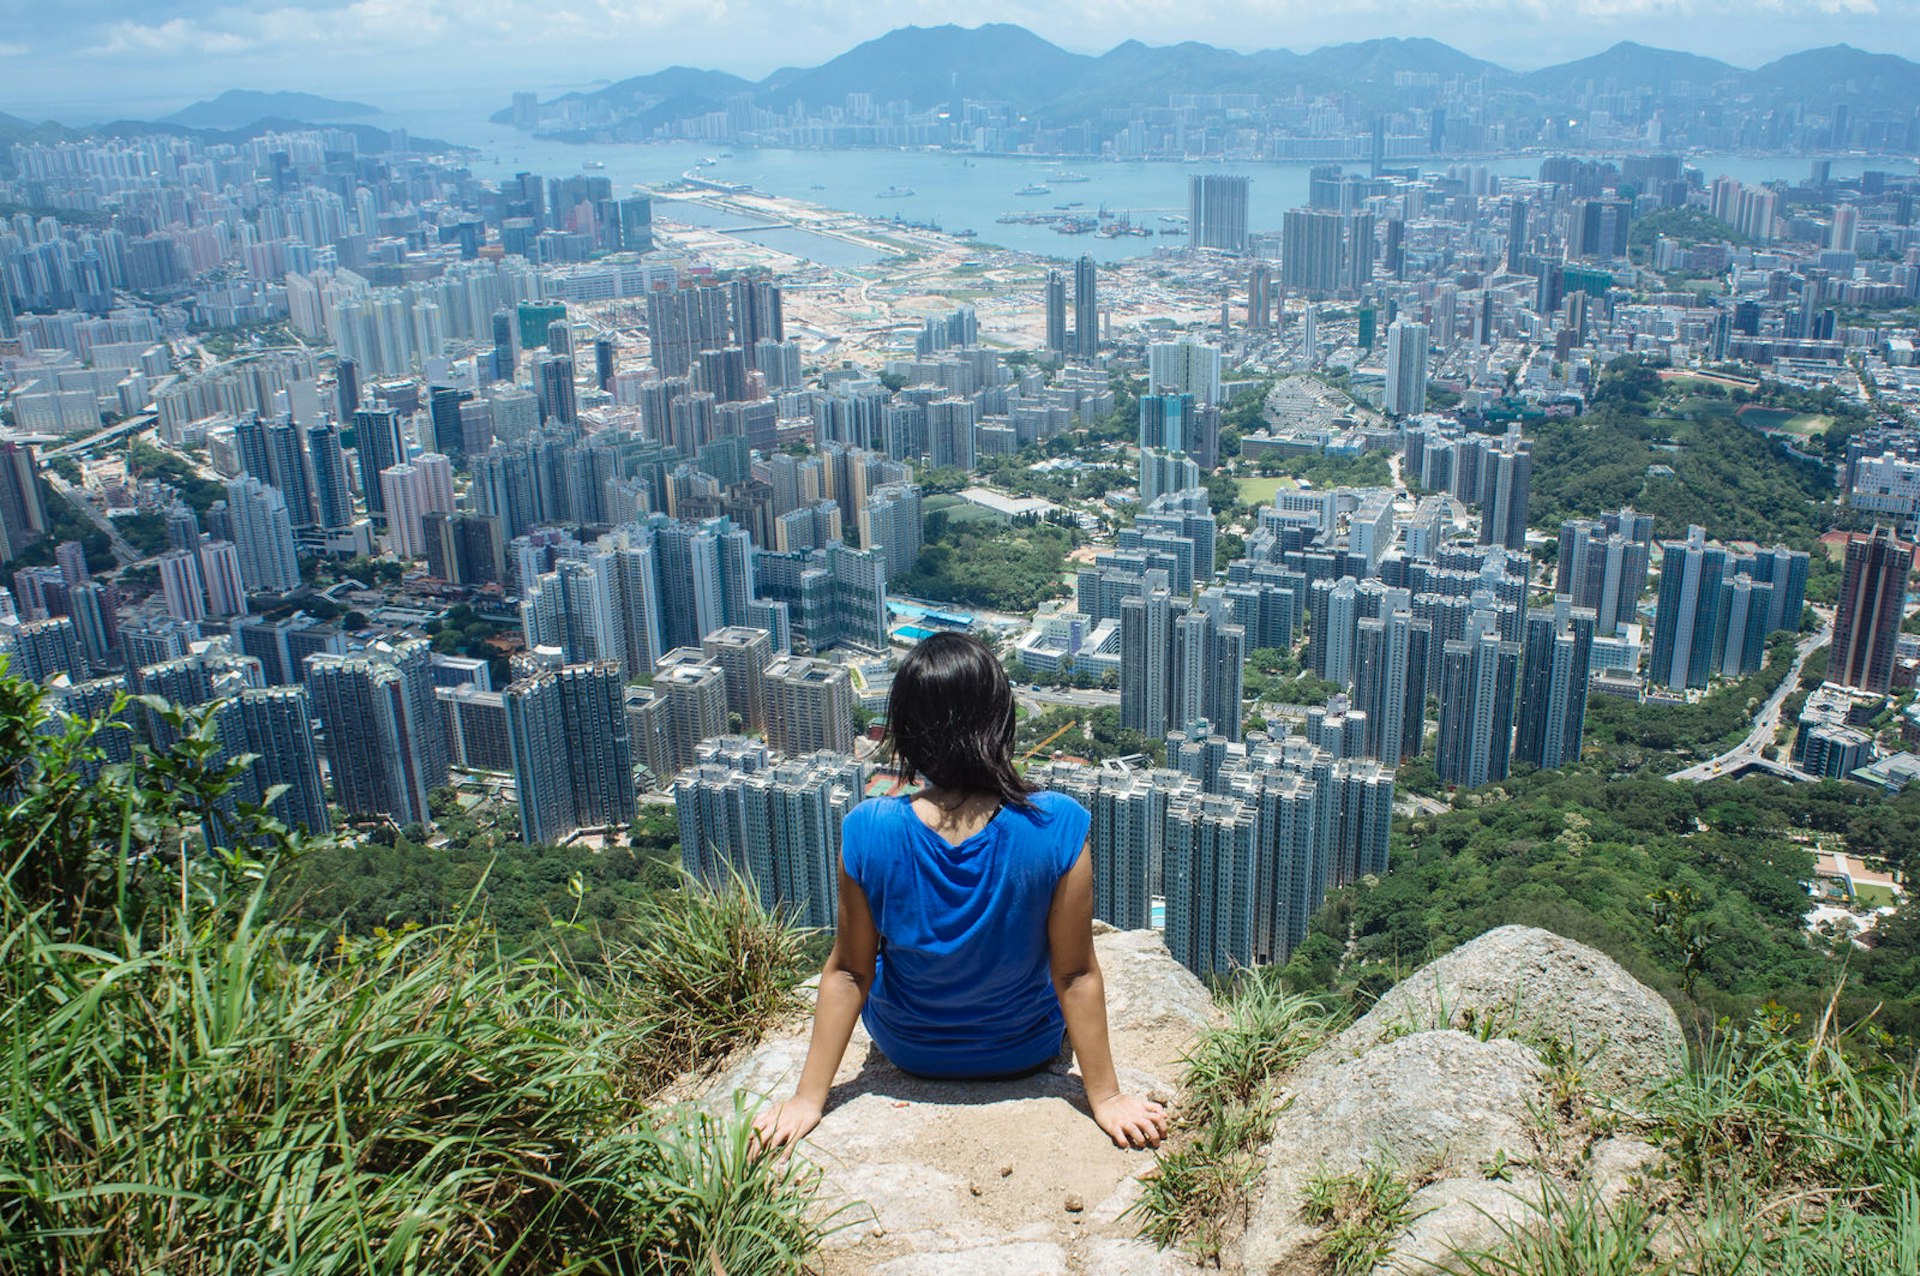 Hiker sits on the way to Lion Rock, part 5 of the MacLeHose trail in Hong Kong. Kowloon and Hong Kong Island are visible from a distance. Hiking is a popular activity among Hong Kong residents and tourists.